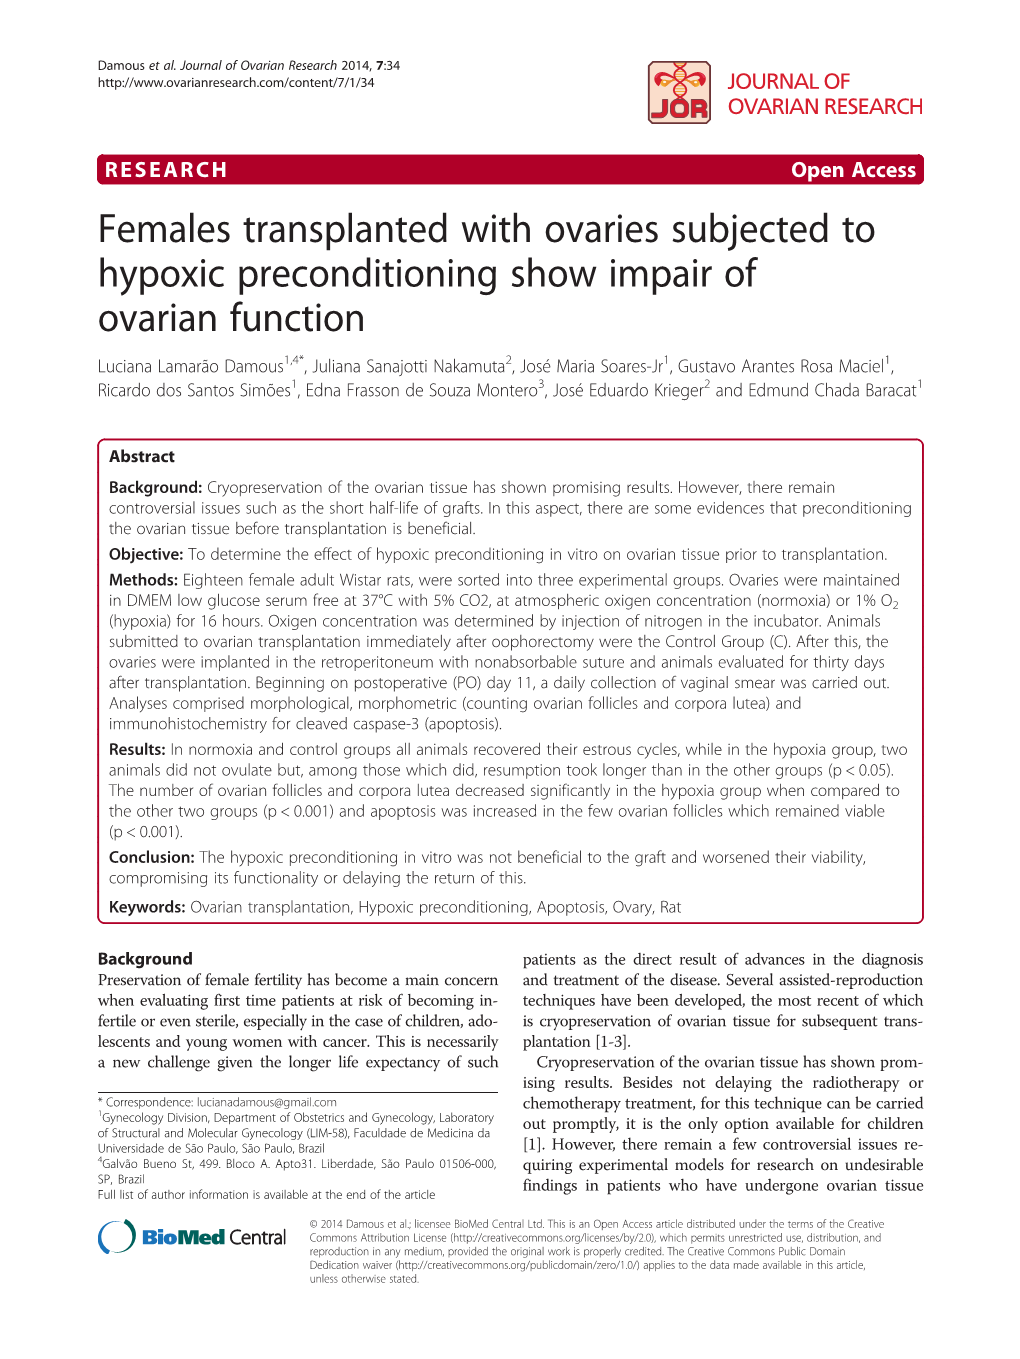 Females Transplanted with Ovaries Subjected to Hypoxic